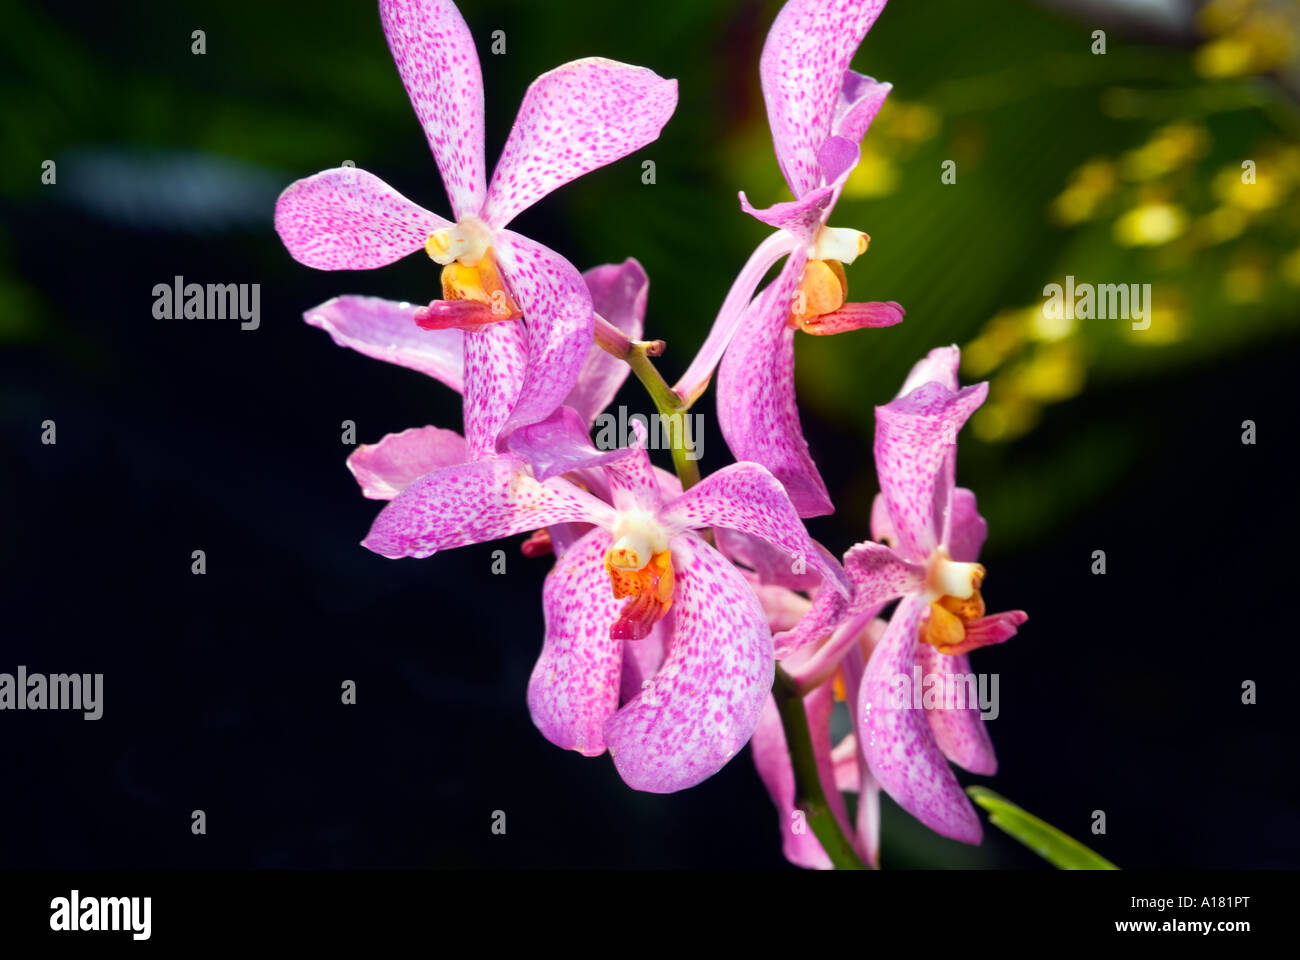 rose lila red white Dendrobium Orchids blossom risp in garden outside SINGAPORE ASIA Stock Photo